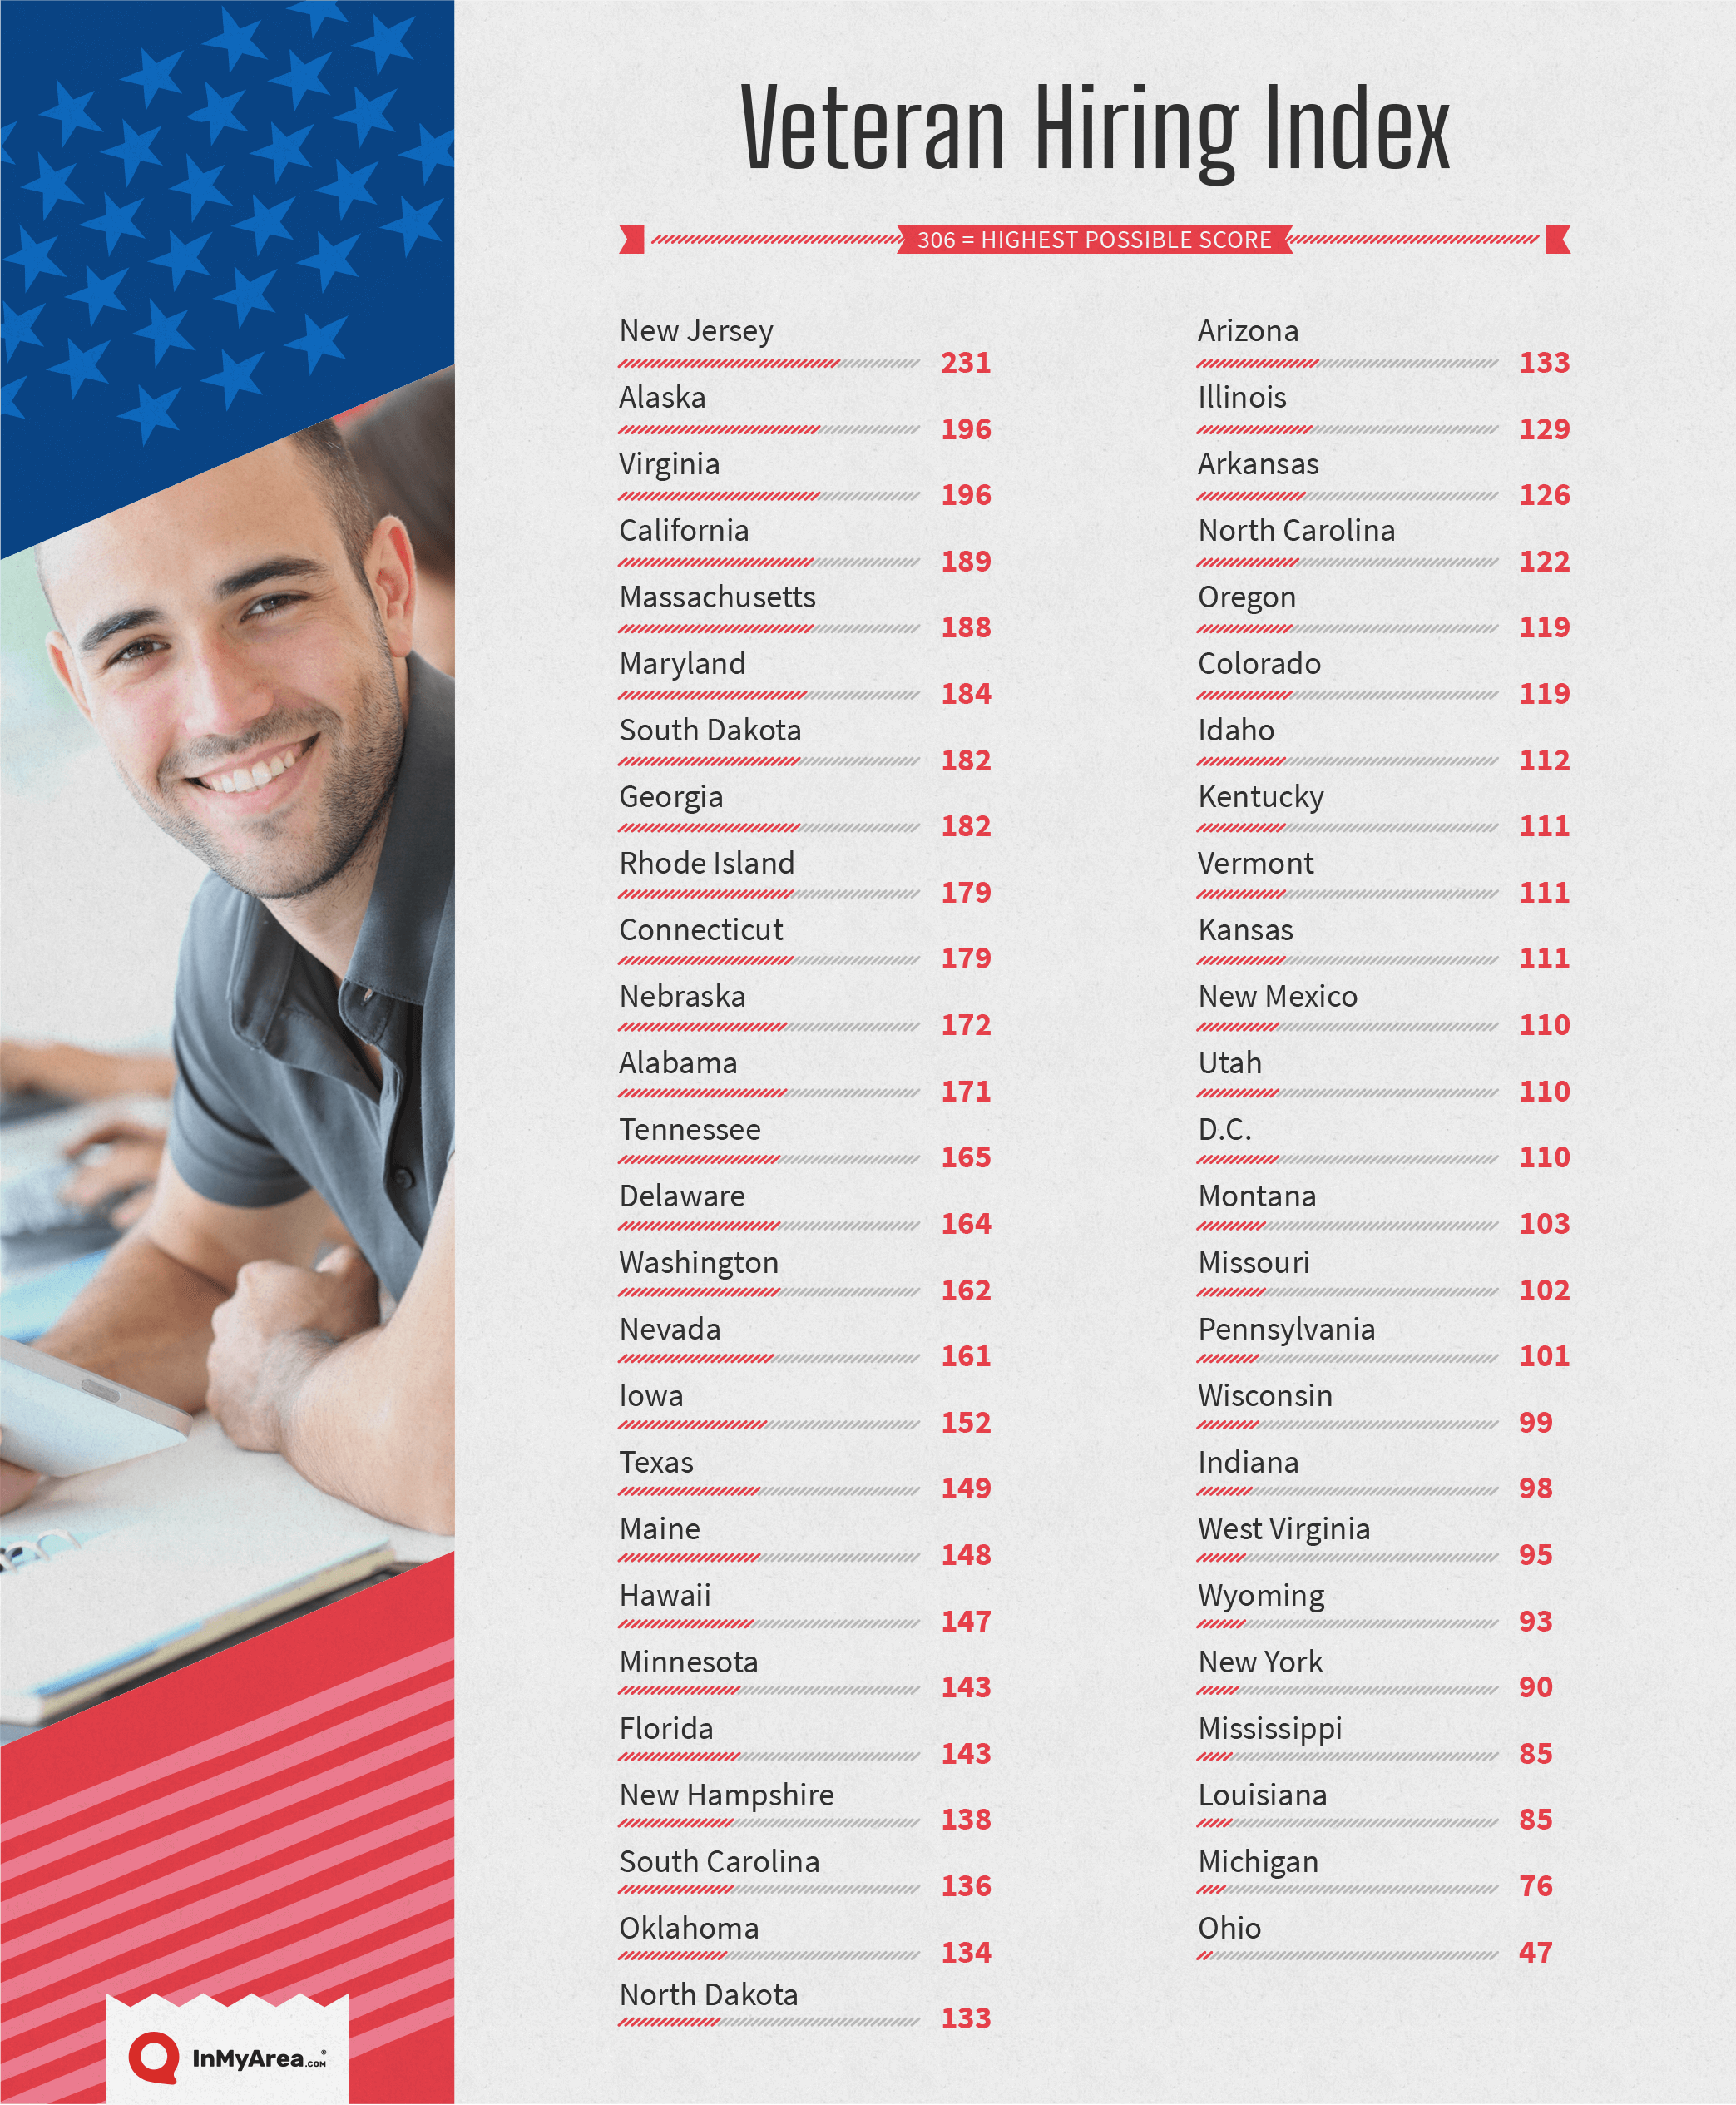 infographic showing veteran hiring index by state